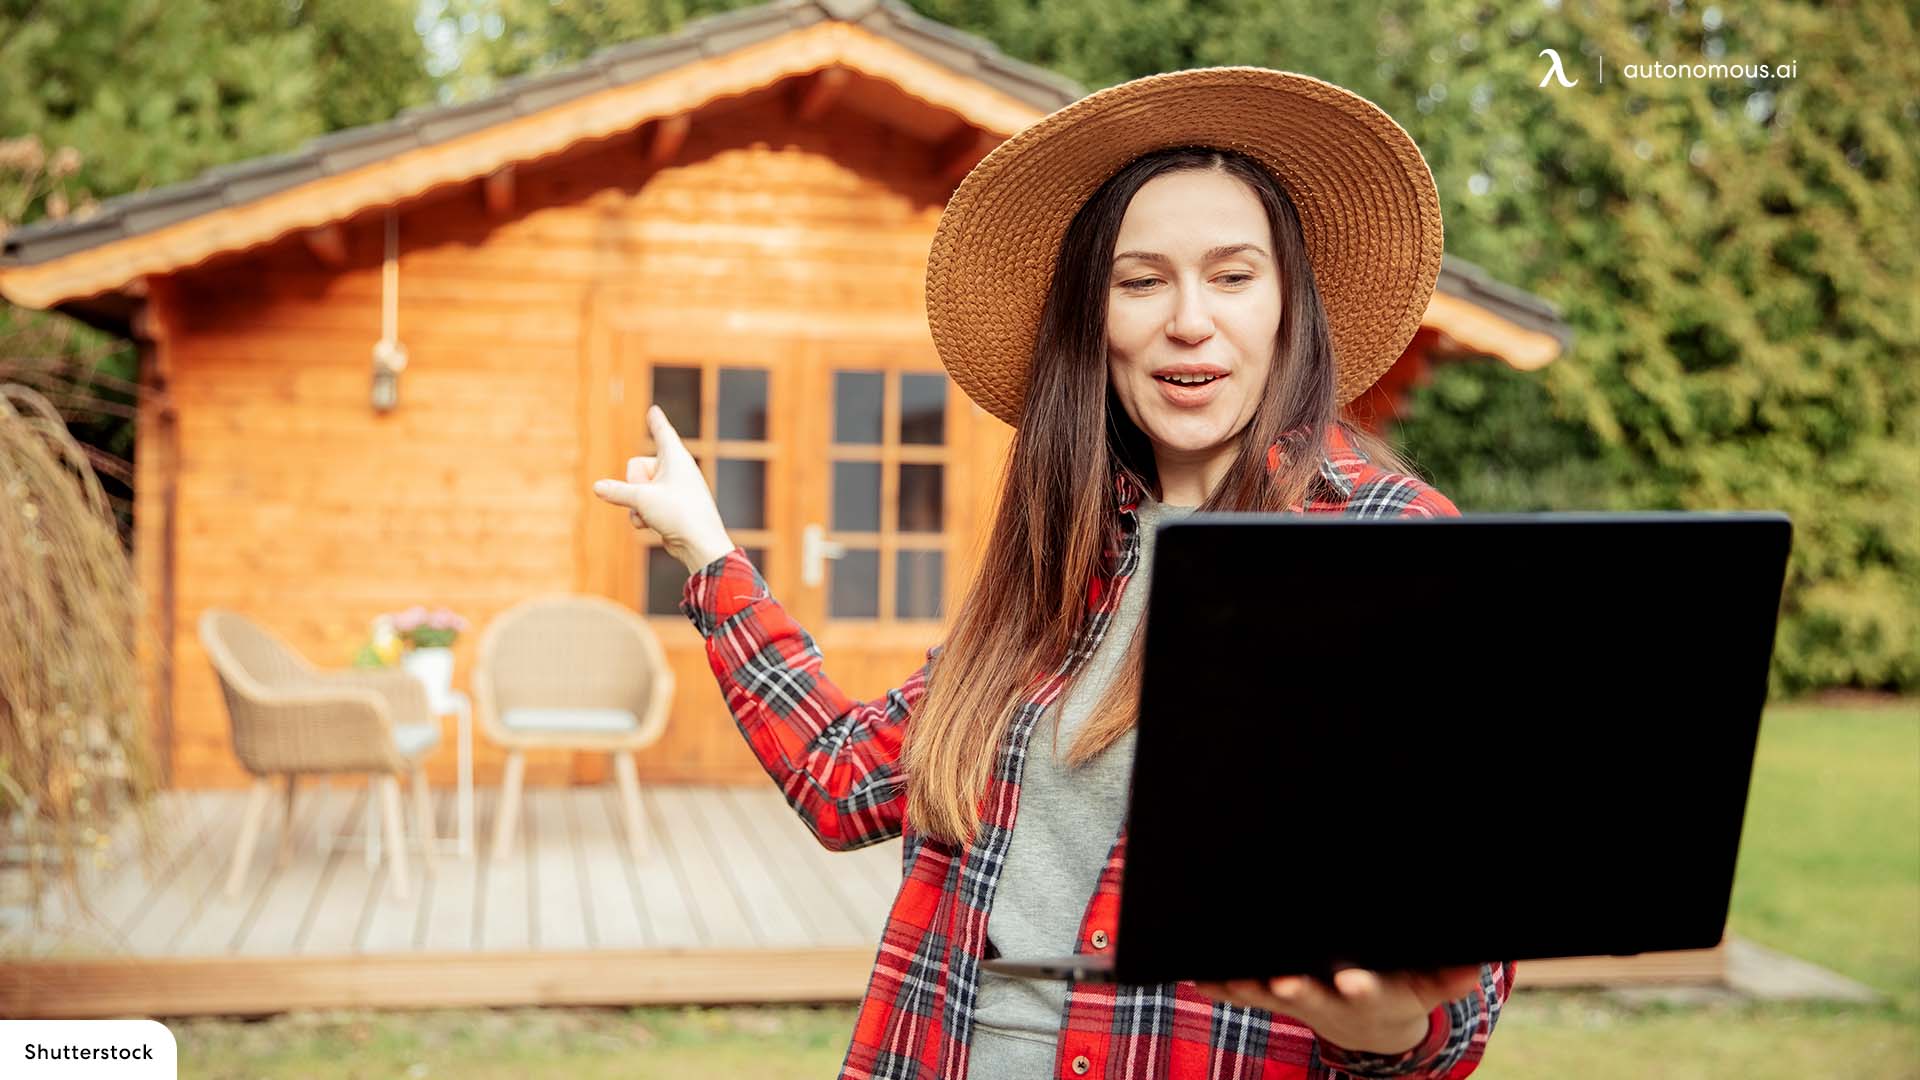 How to Set up a Backyard Office Shed For Home Working